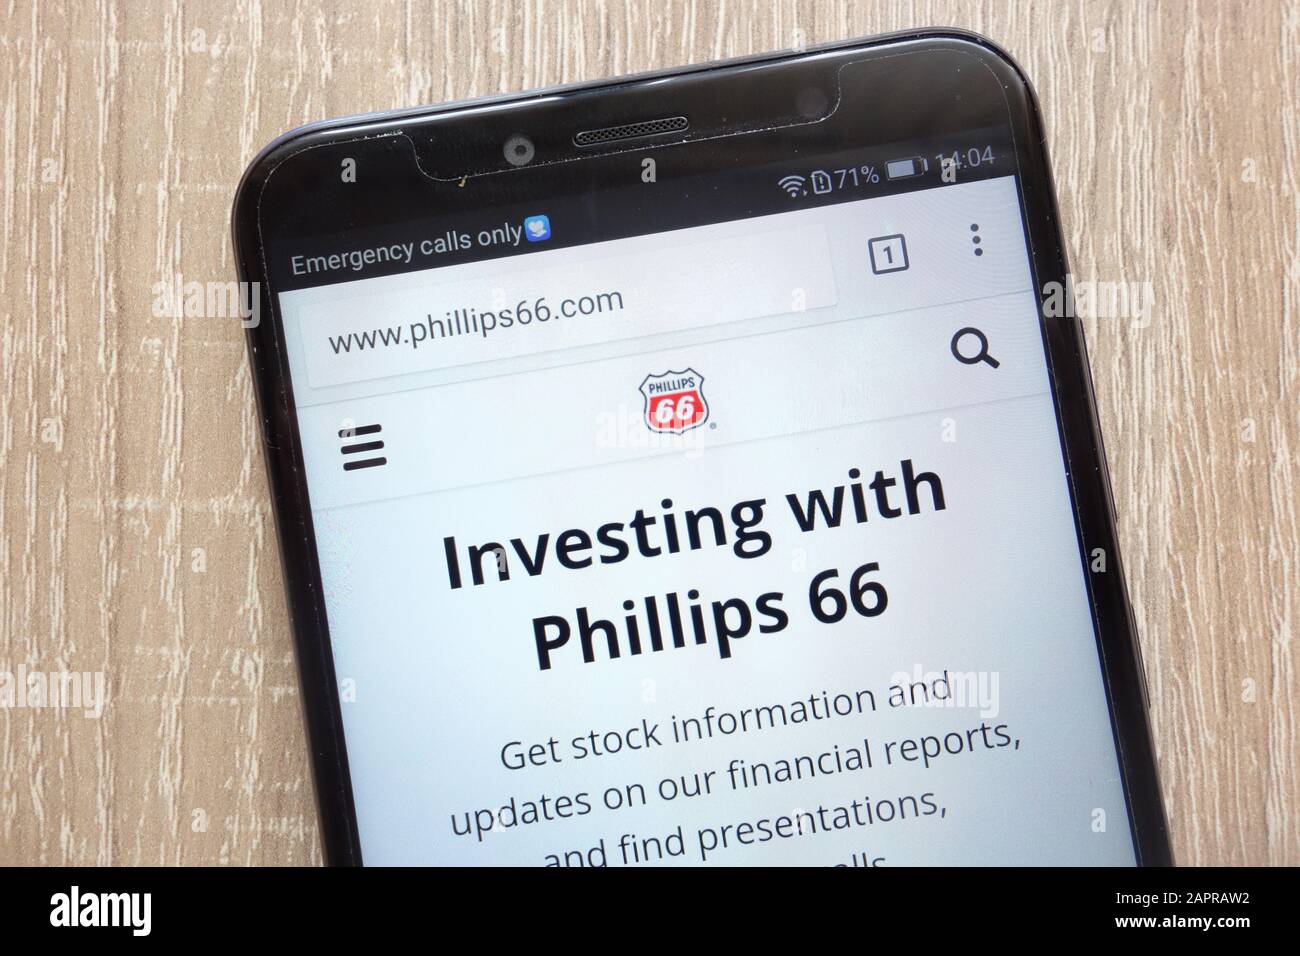 Phillips 66 website displayed on a modern smartphone Stock Photo